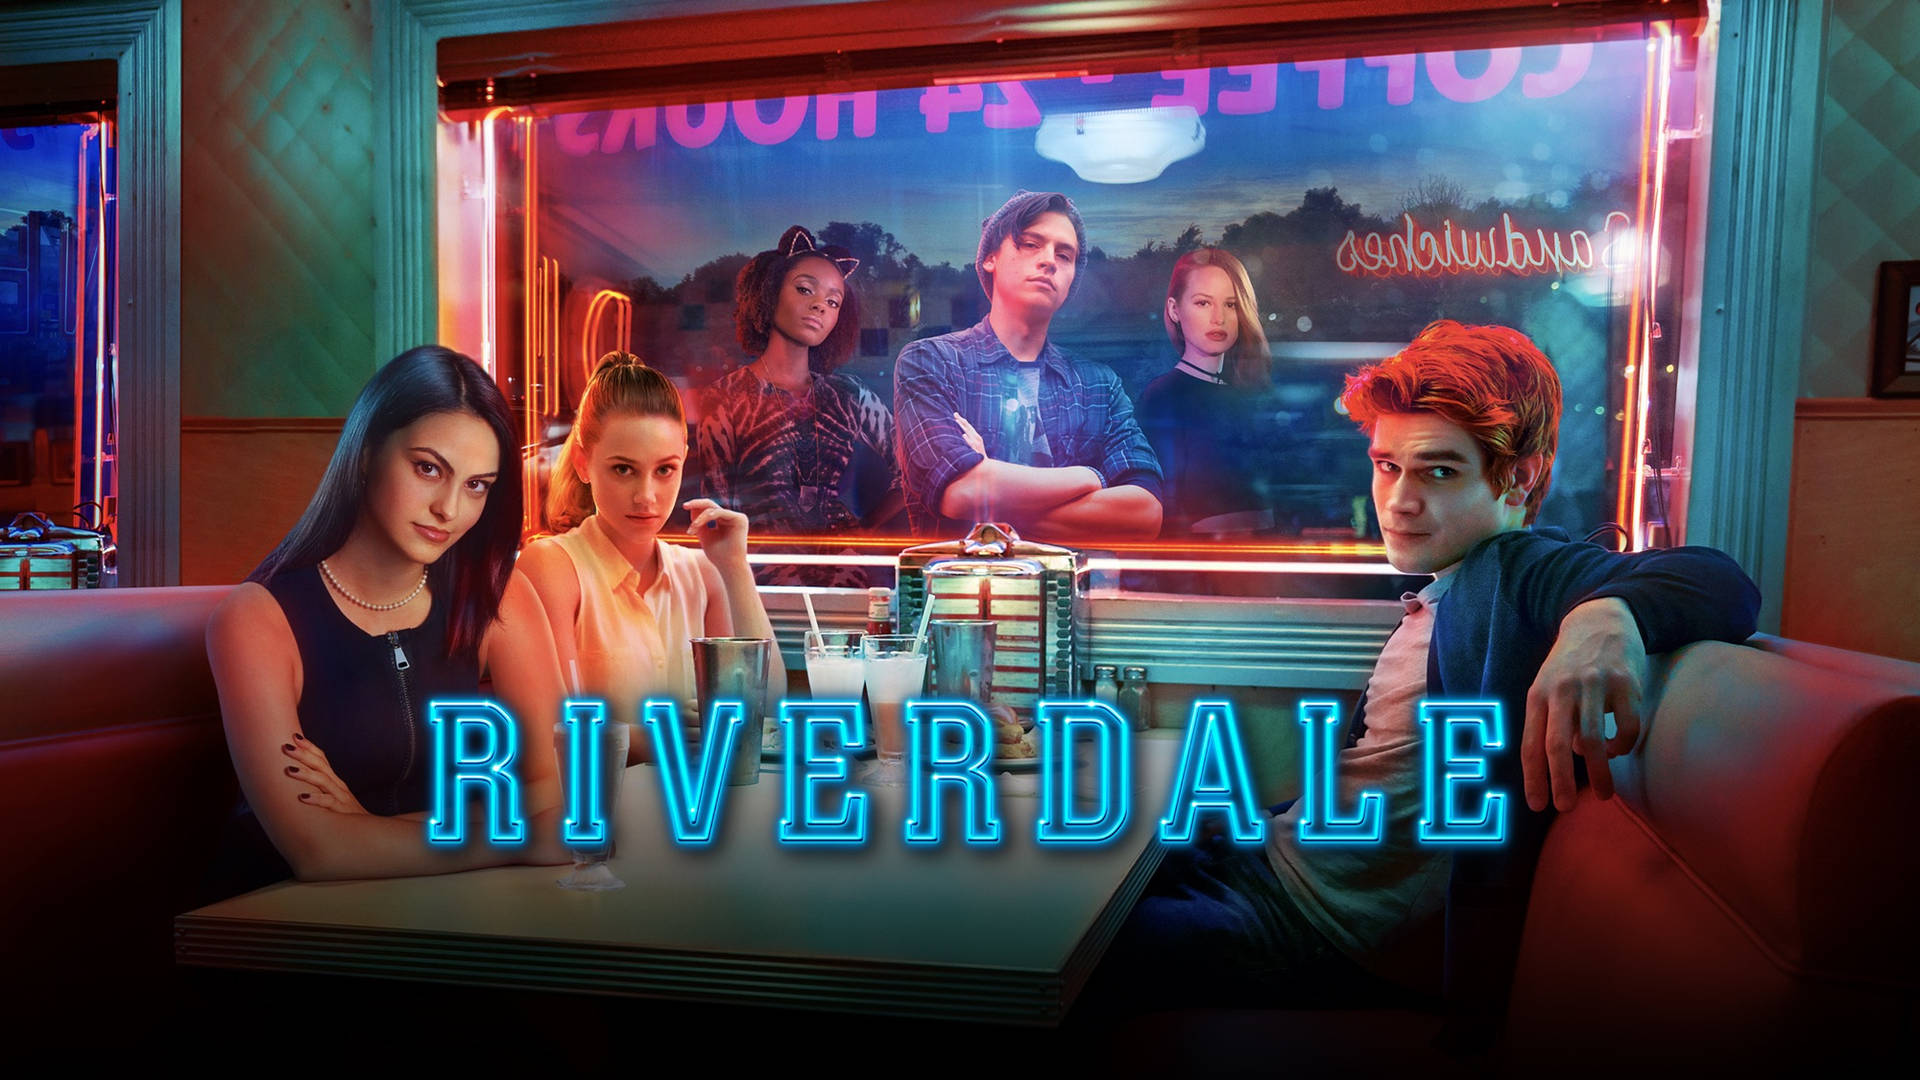 Caption: Iconic characters of Riverdale in a dramatic poster scene Wallpaper